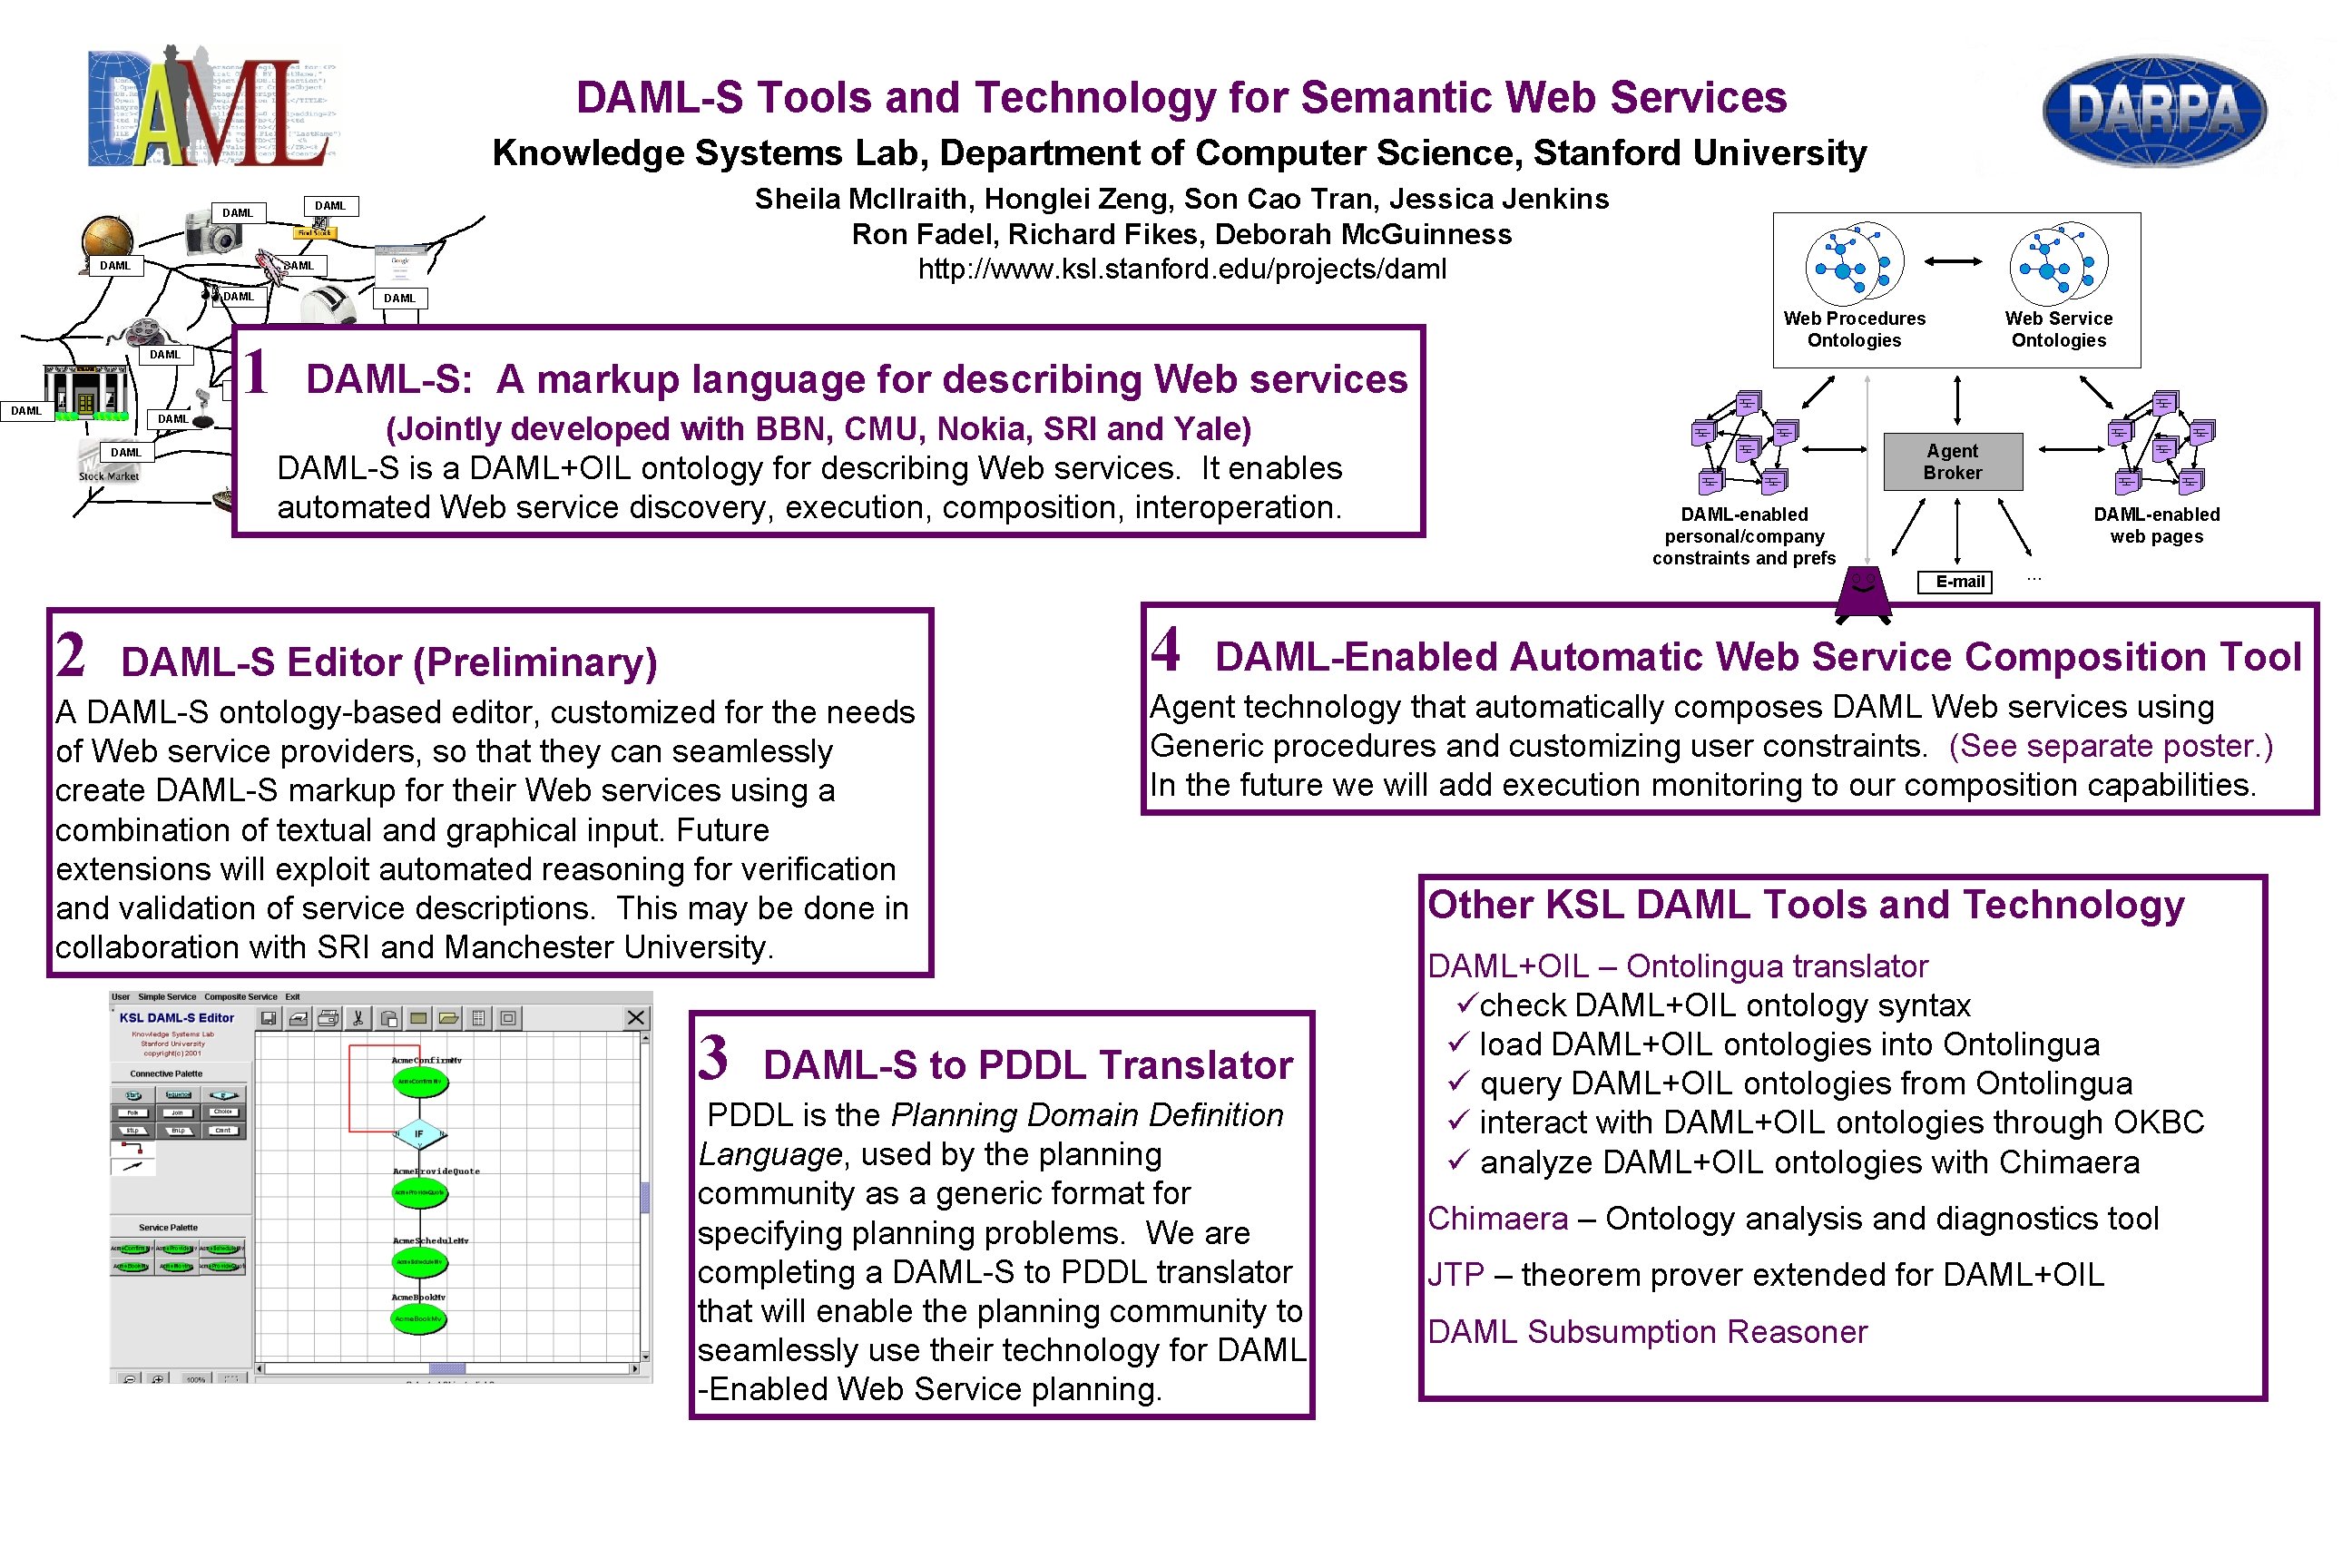 DAML-S Tools and Technology for Semantic Web Services Knowledge Systems Lab, Department of Computer